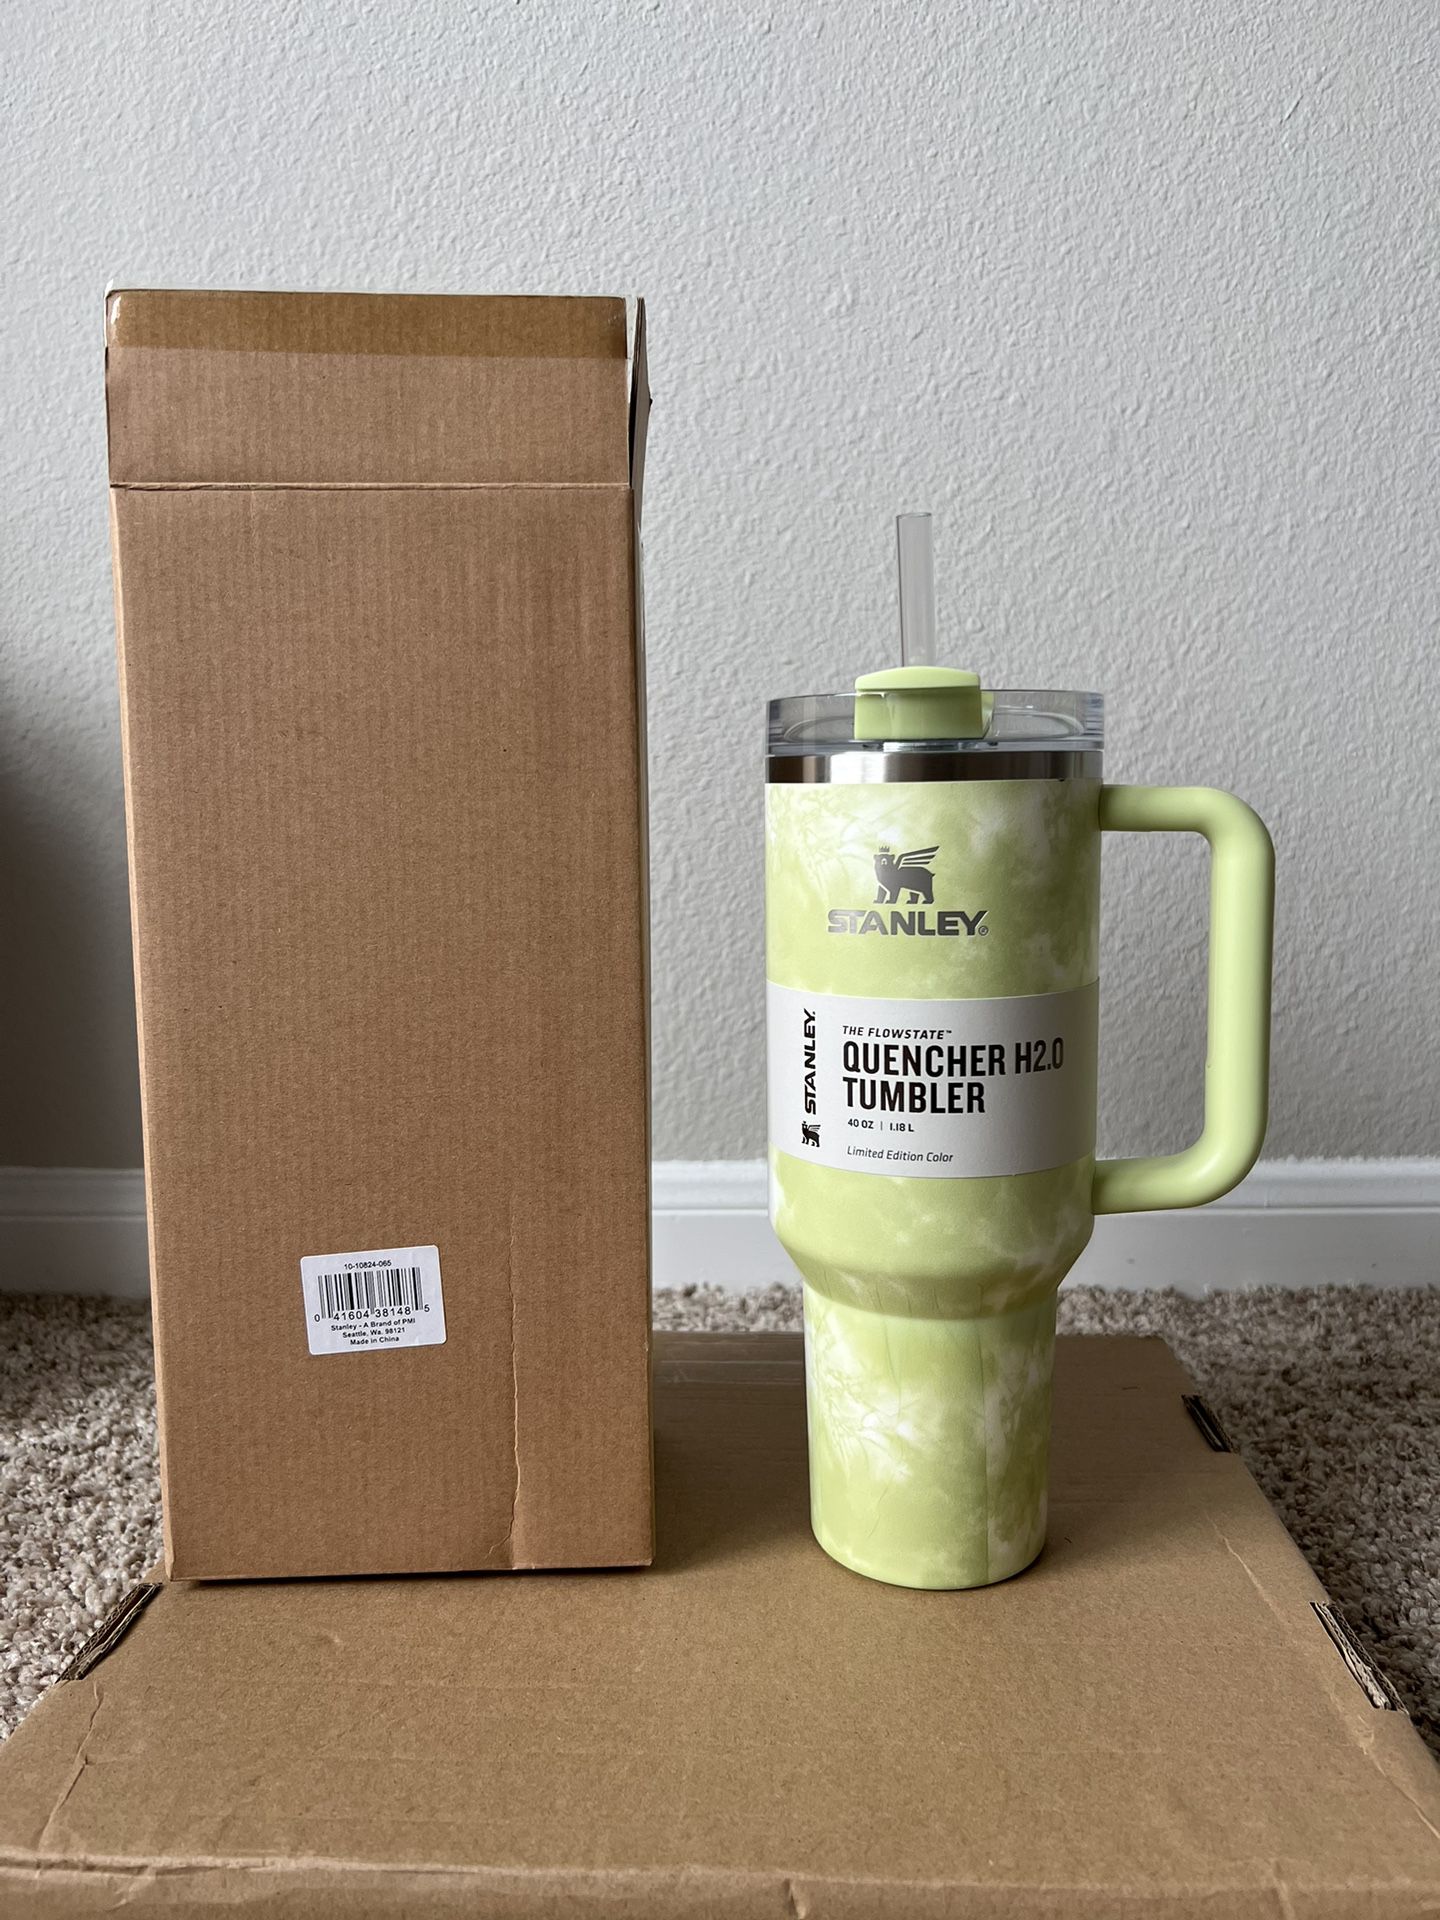 Stanley Quencher H2.0 Tumbler Pool for Sale in Seattle, WA - OfferUp